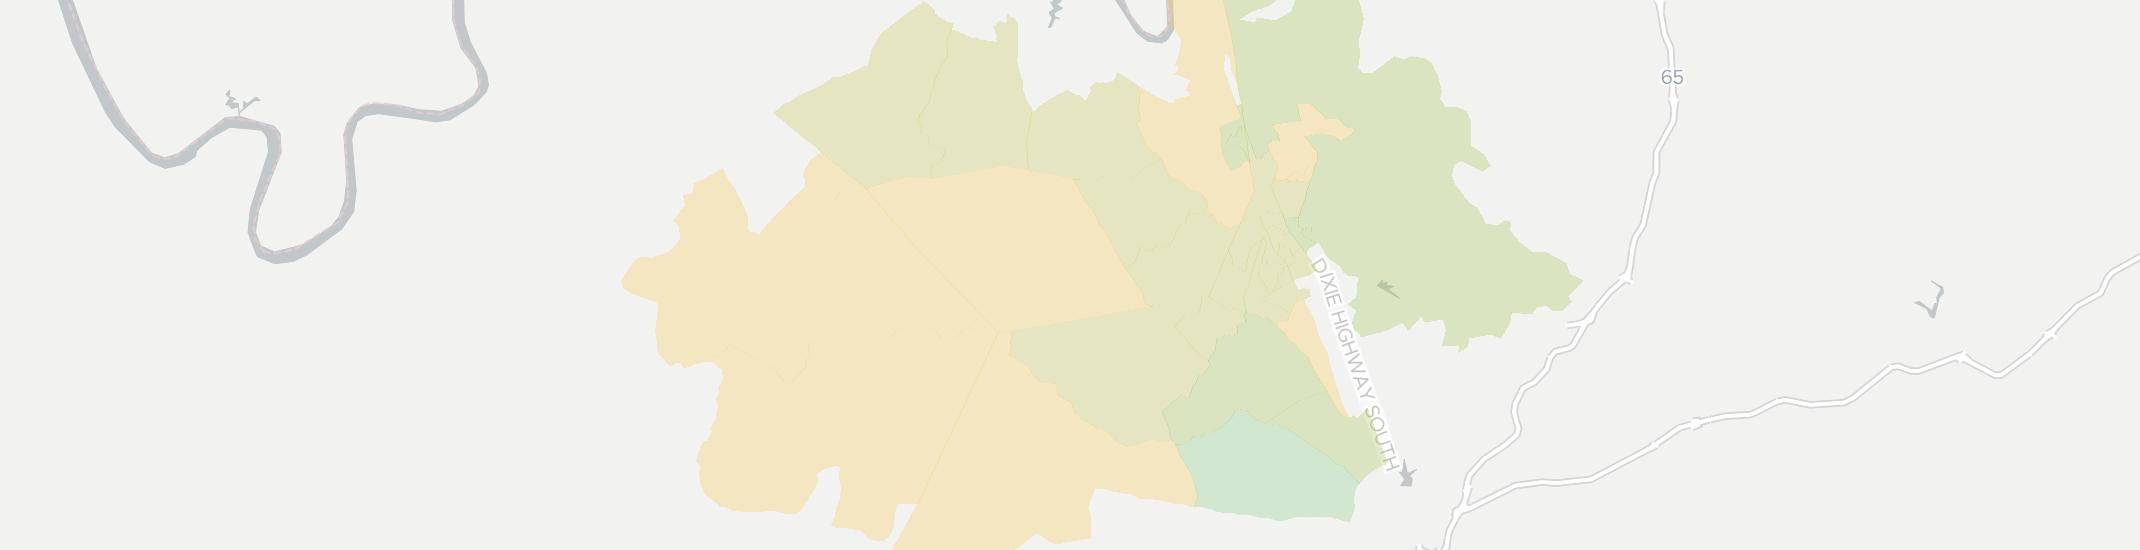 Vine Grove Internet Competition Map. Click for interactive map